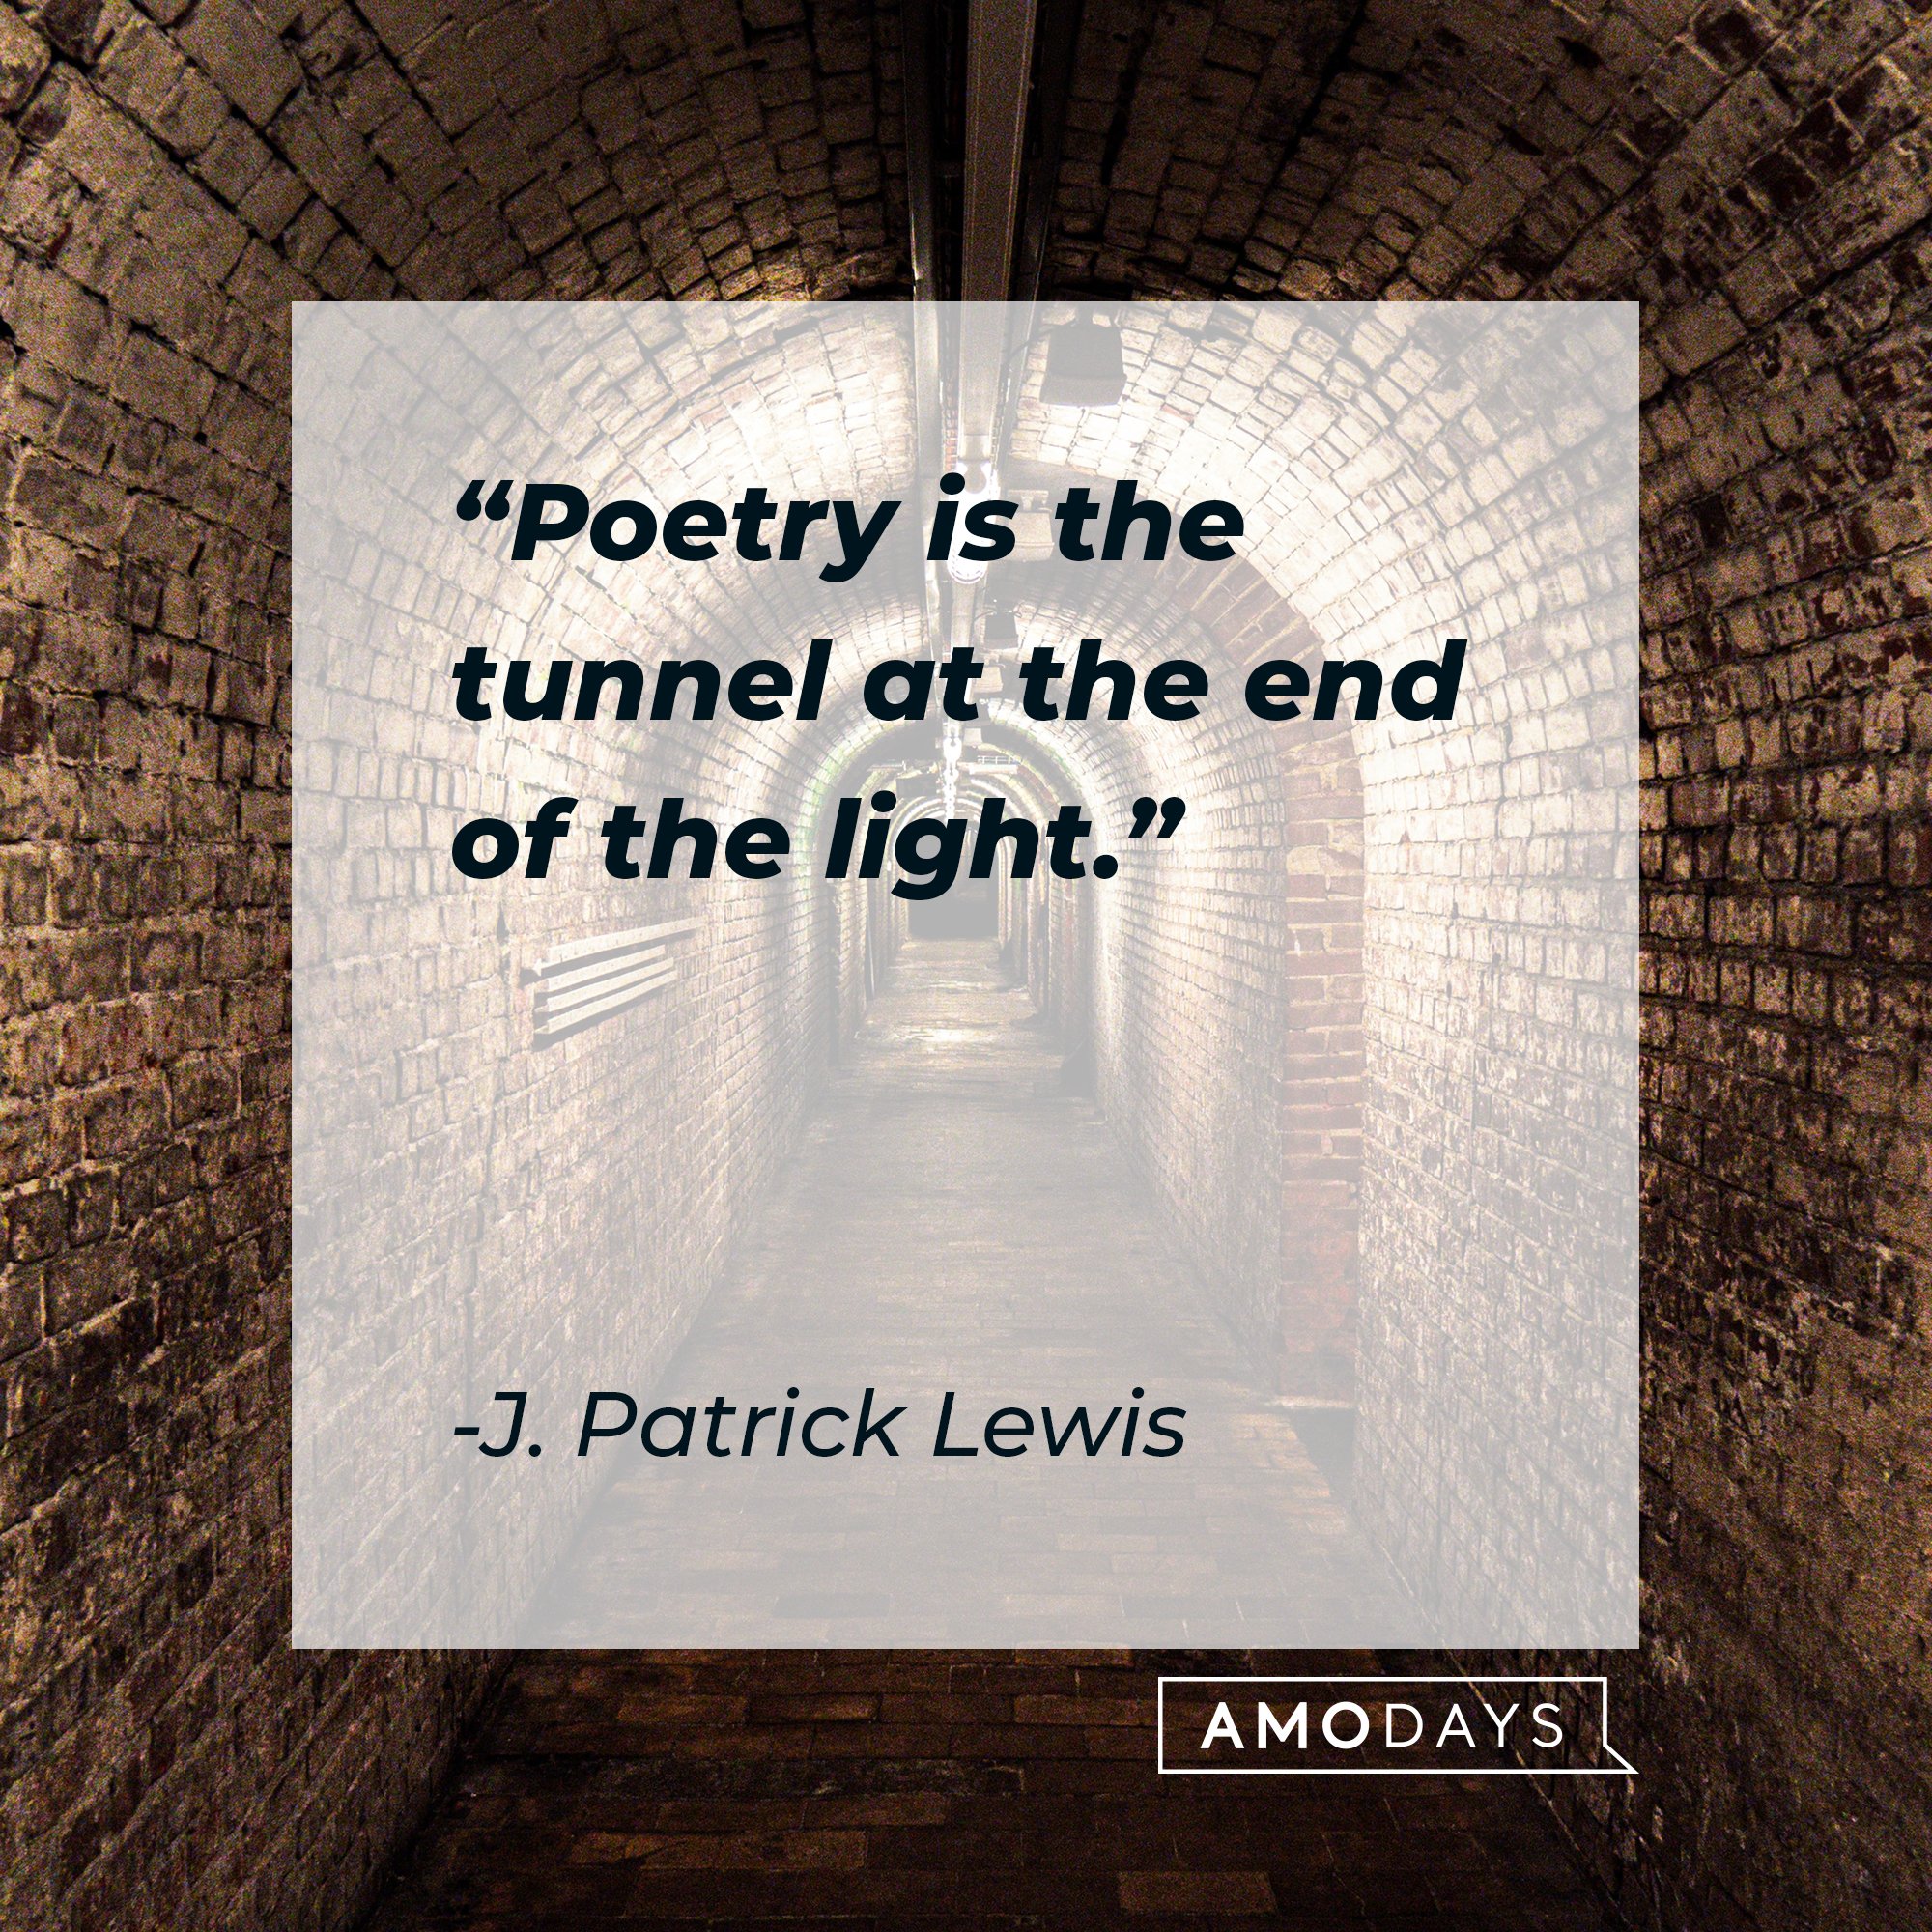 J. Patrick Lewis’ quote: "Poetry is the tunnel at the end of the light.” | Image: AmoDays